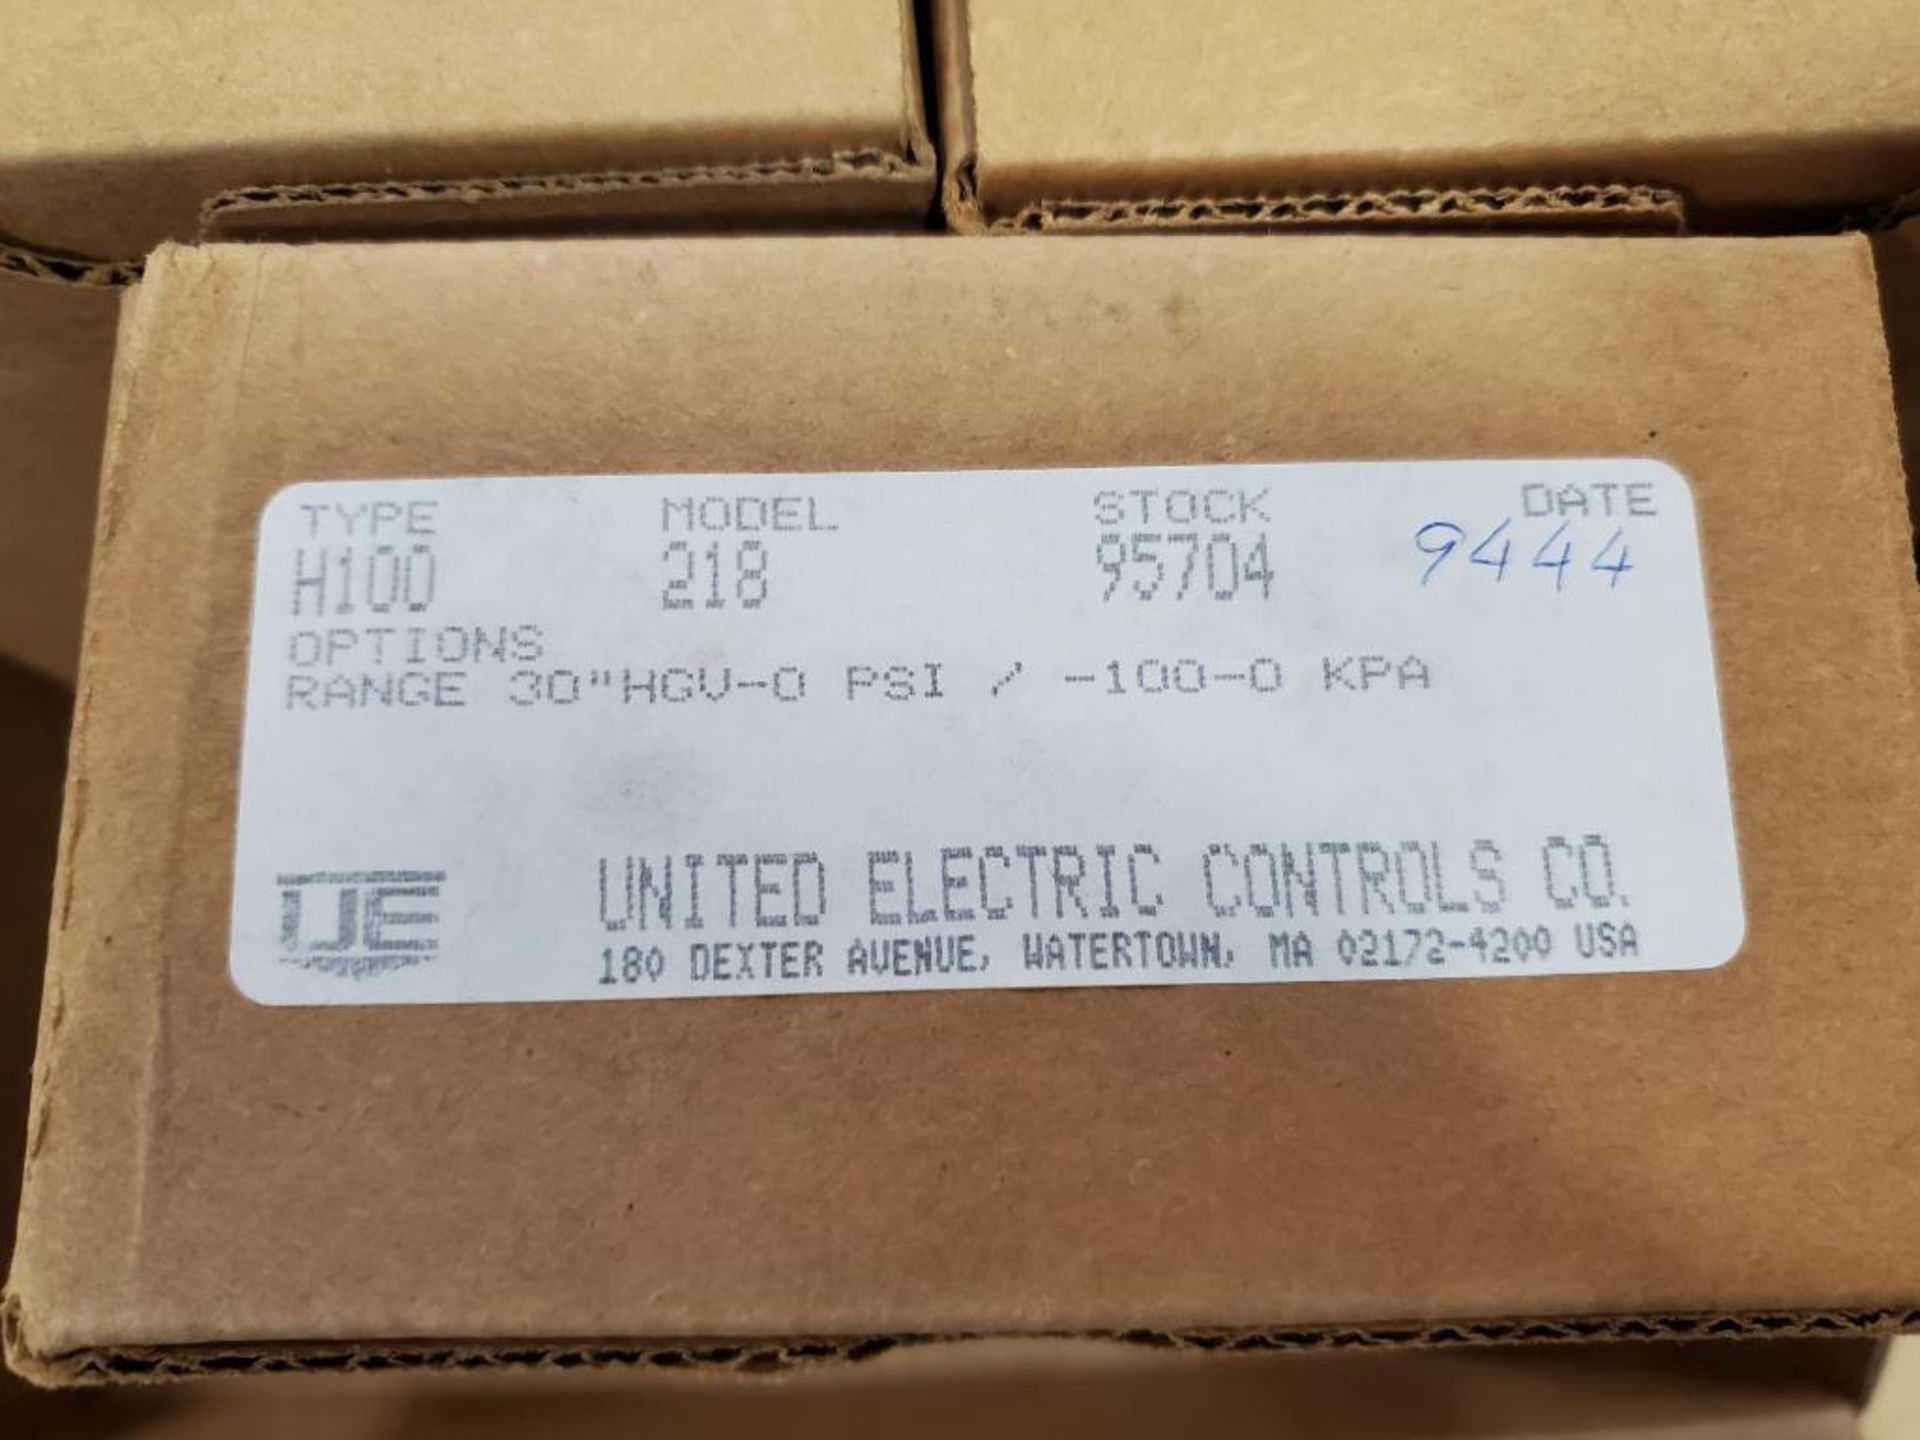 Qty 5 - United Electric controls H100 Model 218 gage. 30" HGV-0 PSI / -100-0 KPA. New in box. - Image 6 of 8